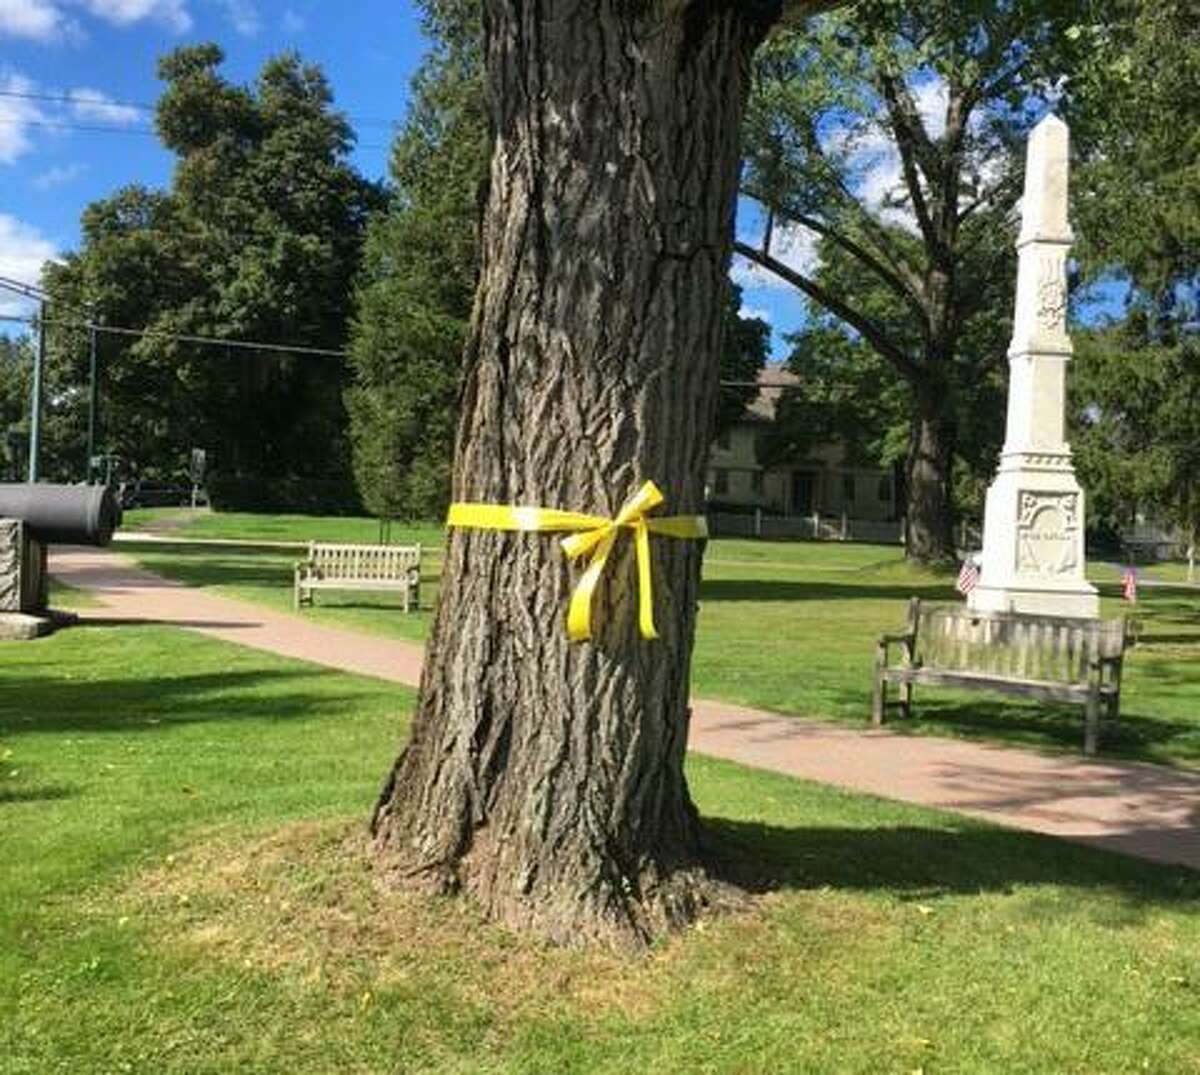 The debate over the yellow ribbons affixed to trees on the Litchfield town green will continue on Tuesday.